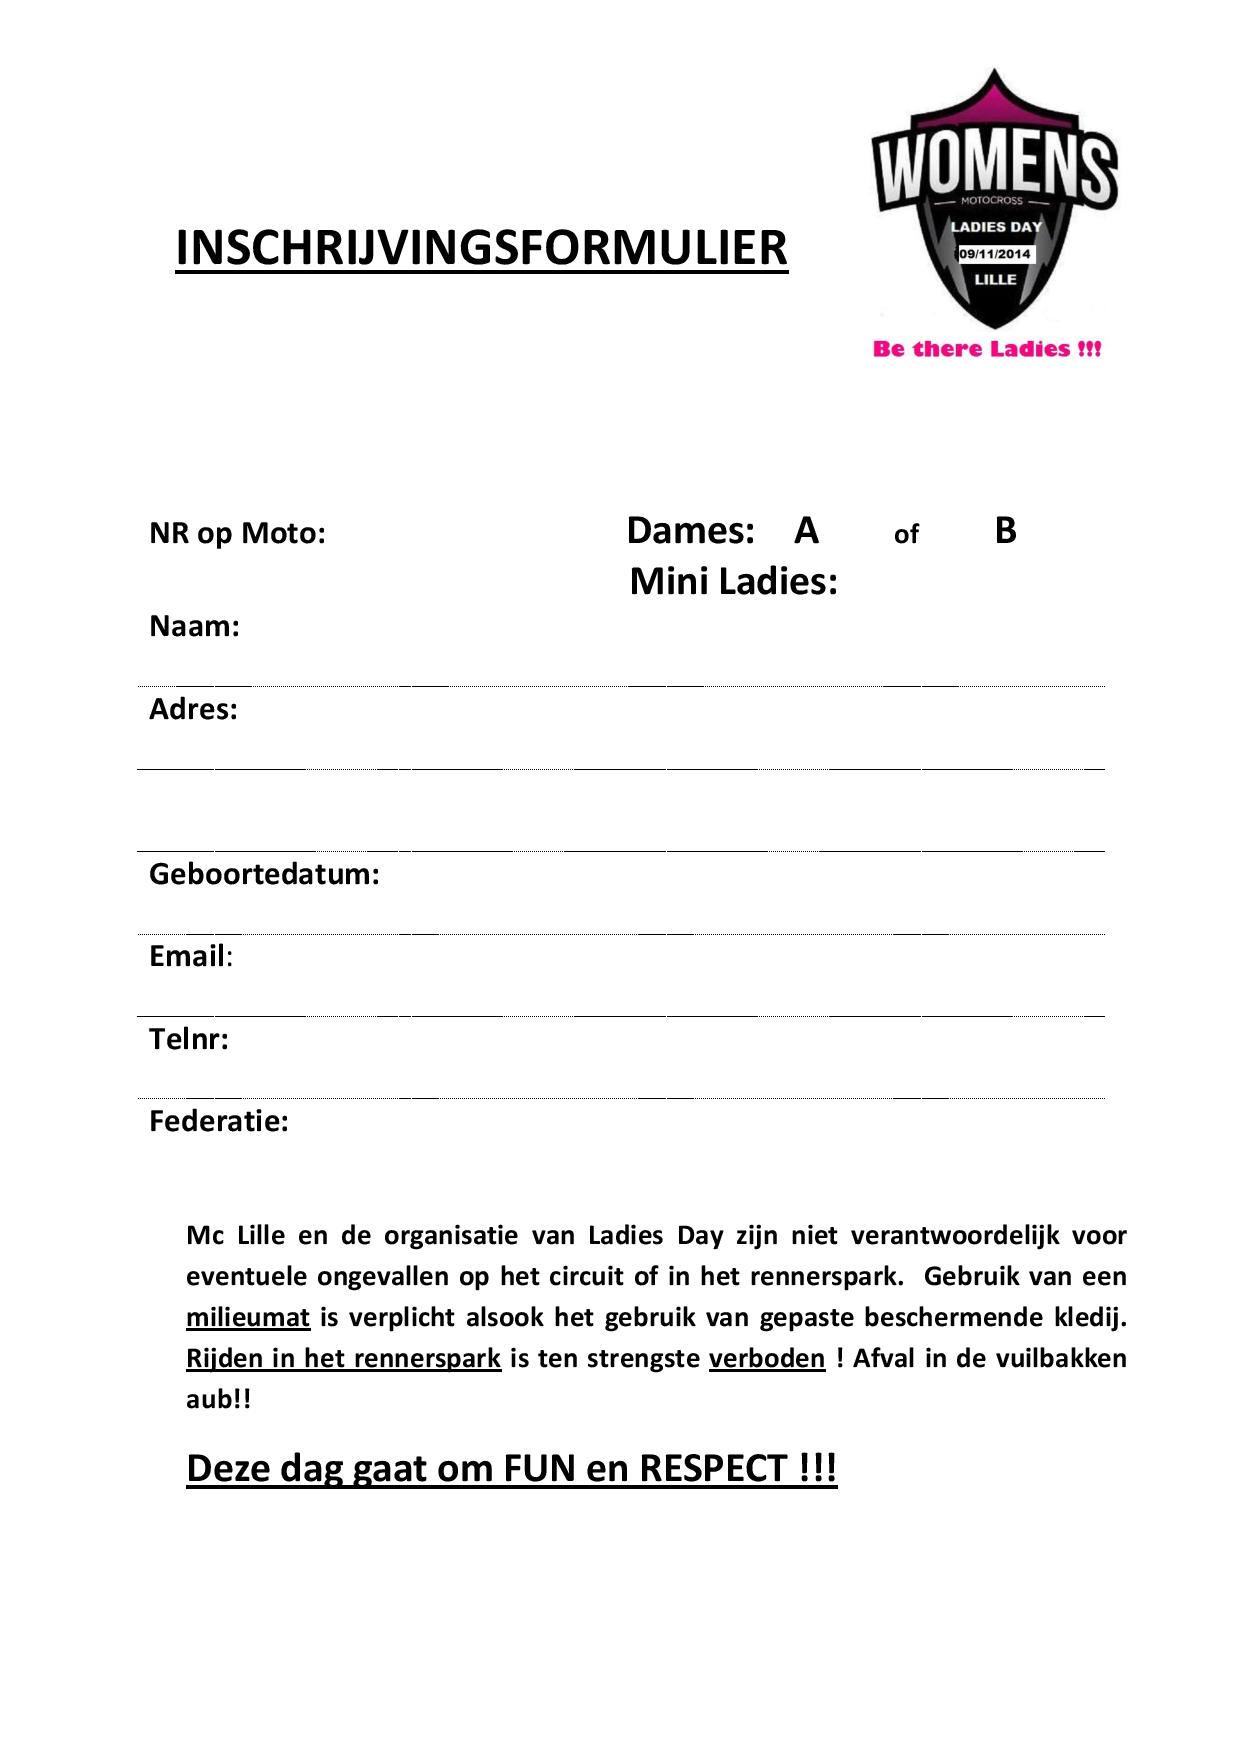 ladiesday INSCHRIJVINGSFORMULIER-page-001.jpg